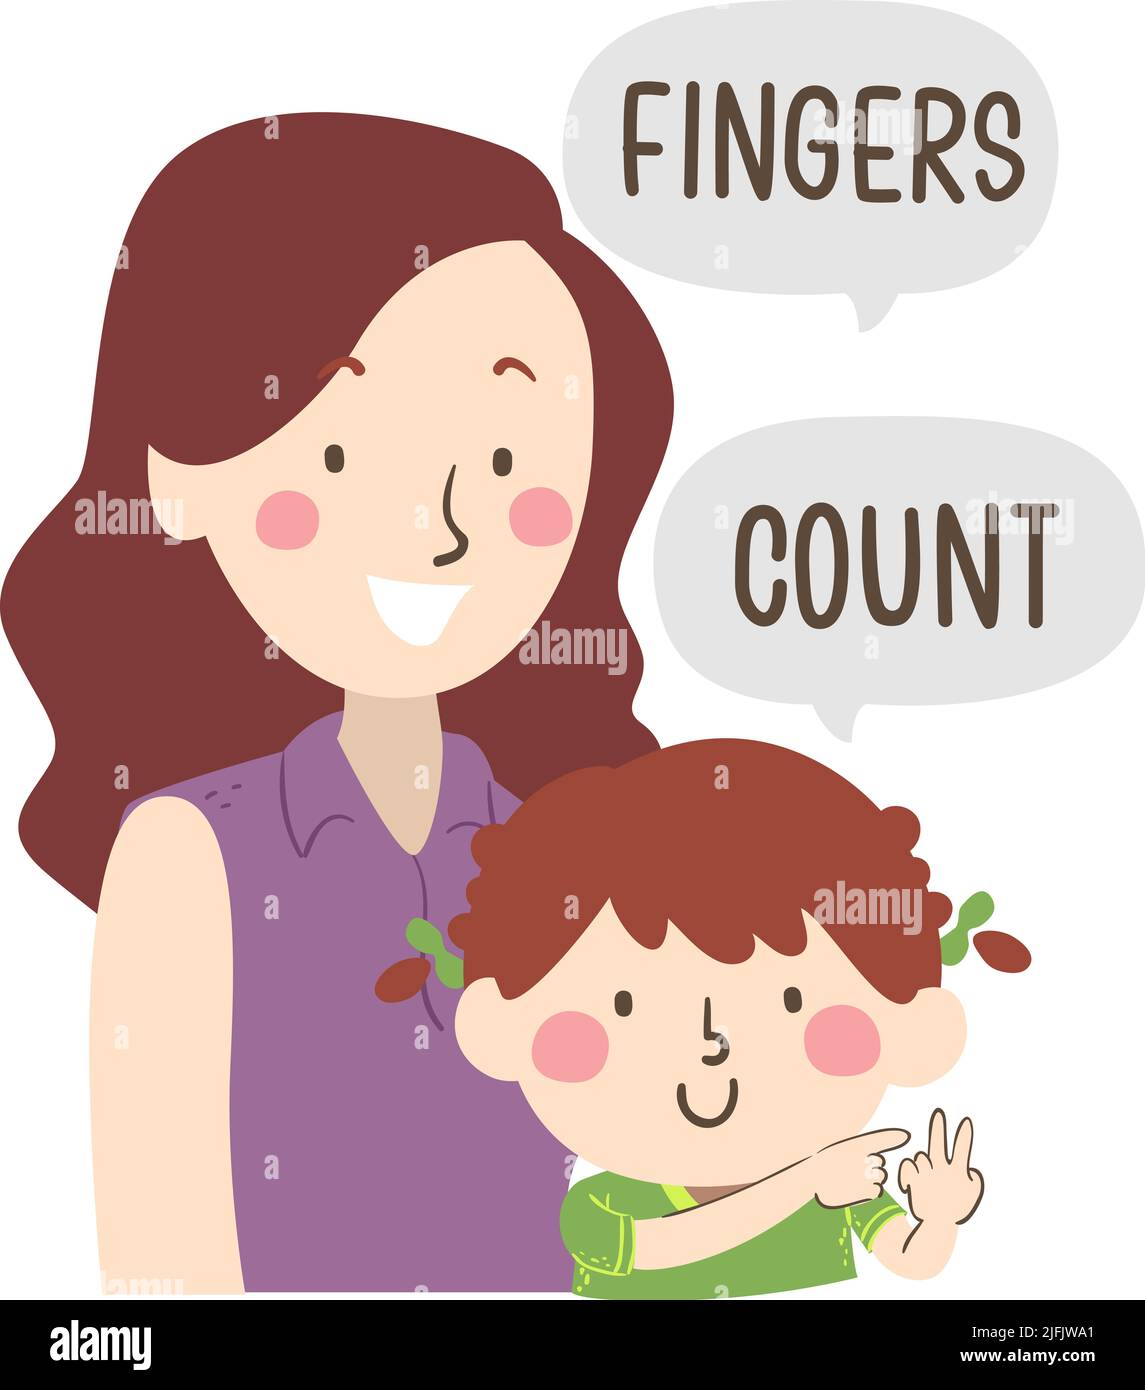 Illustration of Kid Girl Pointing with Two Fingers Up Saying Count, Mom Teaching Body Part Saying Fingers Stock Photo